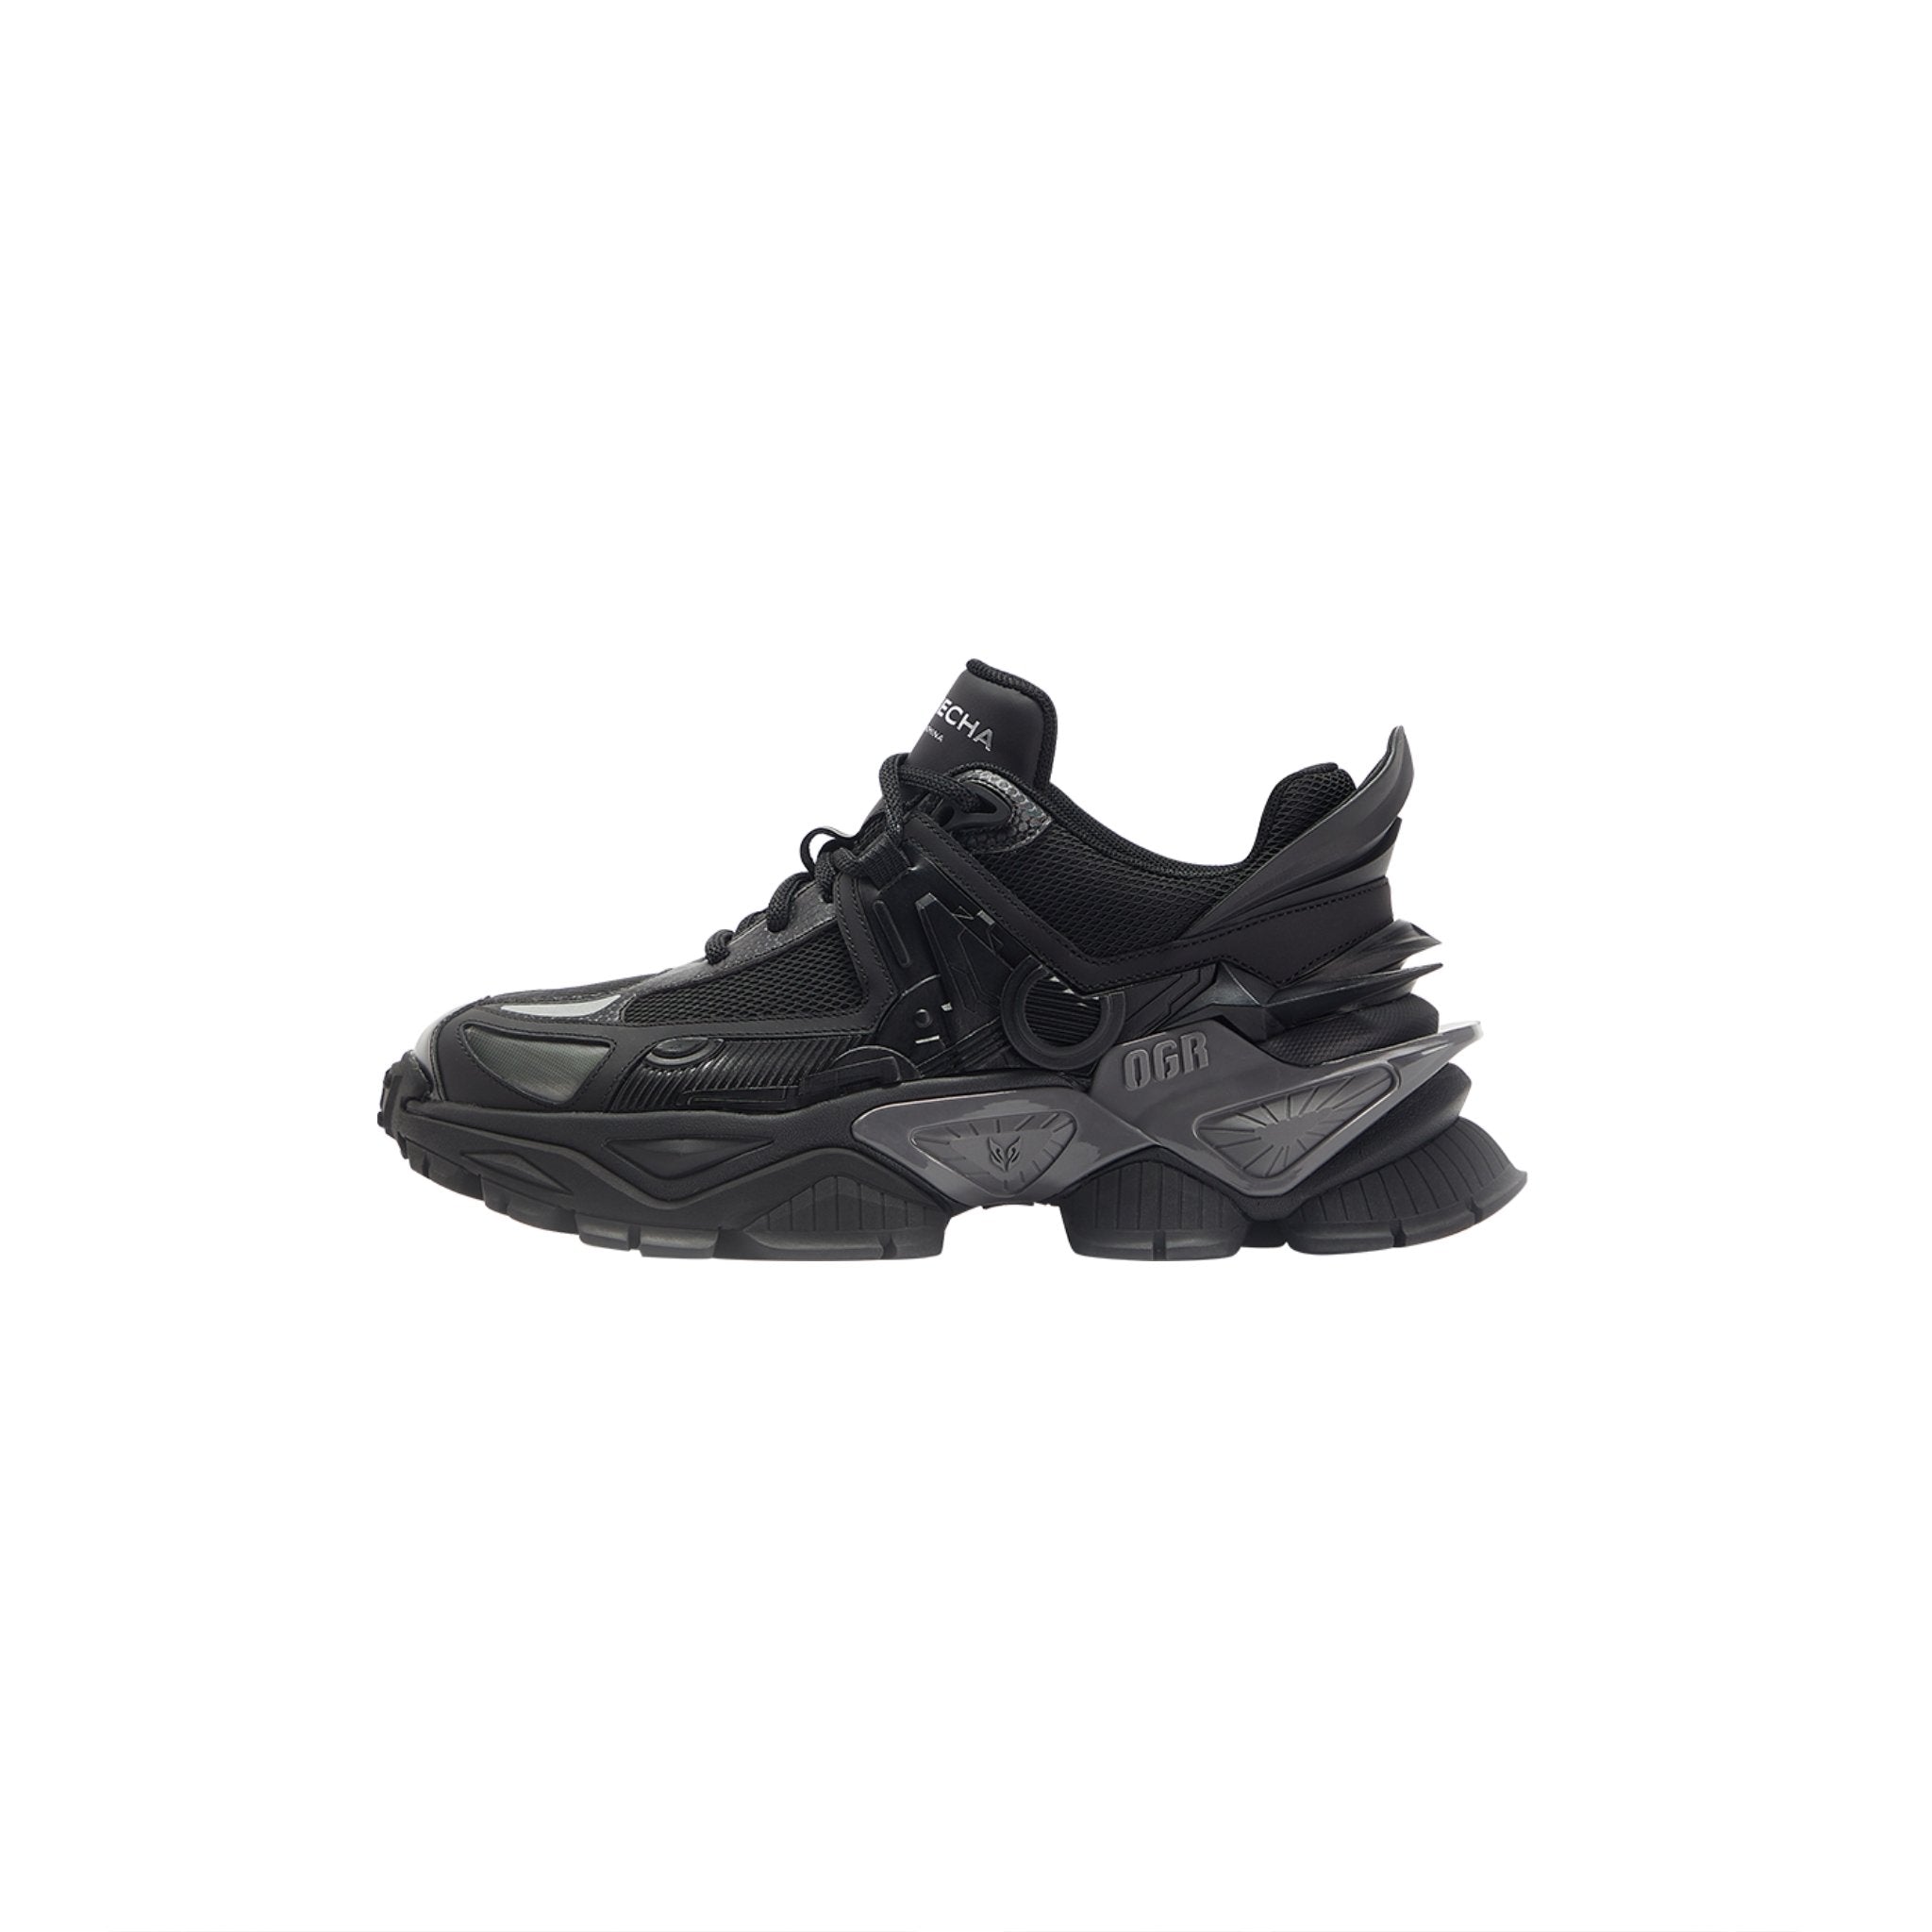 OGR Wanderers Collection 3D Mecha Shoes Black | MADA IN CHINA